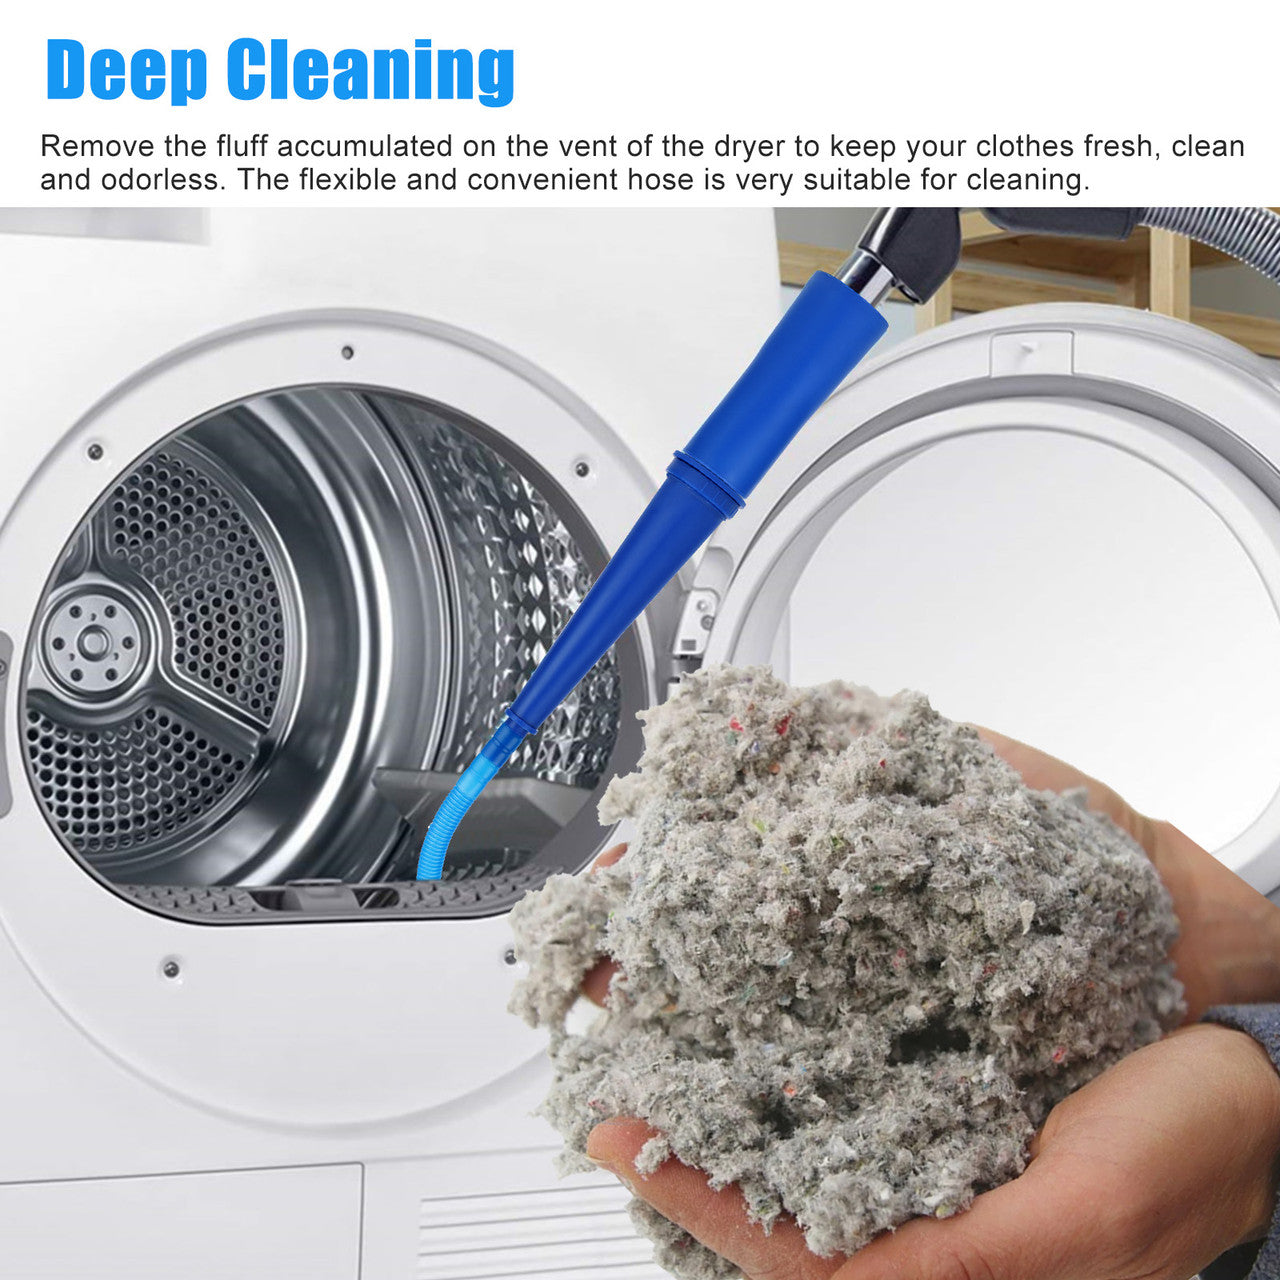 Dryer Lint Vacuum Cleaner Kit - Flexible Dryer Vent Cleaner Kit Attaches Easily to The Vacuum Hose of Most Vacuums - Also Cleans Your Washer, Refrigerator, and Other Home Appliances ( Blue )